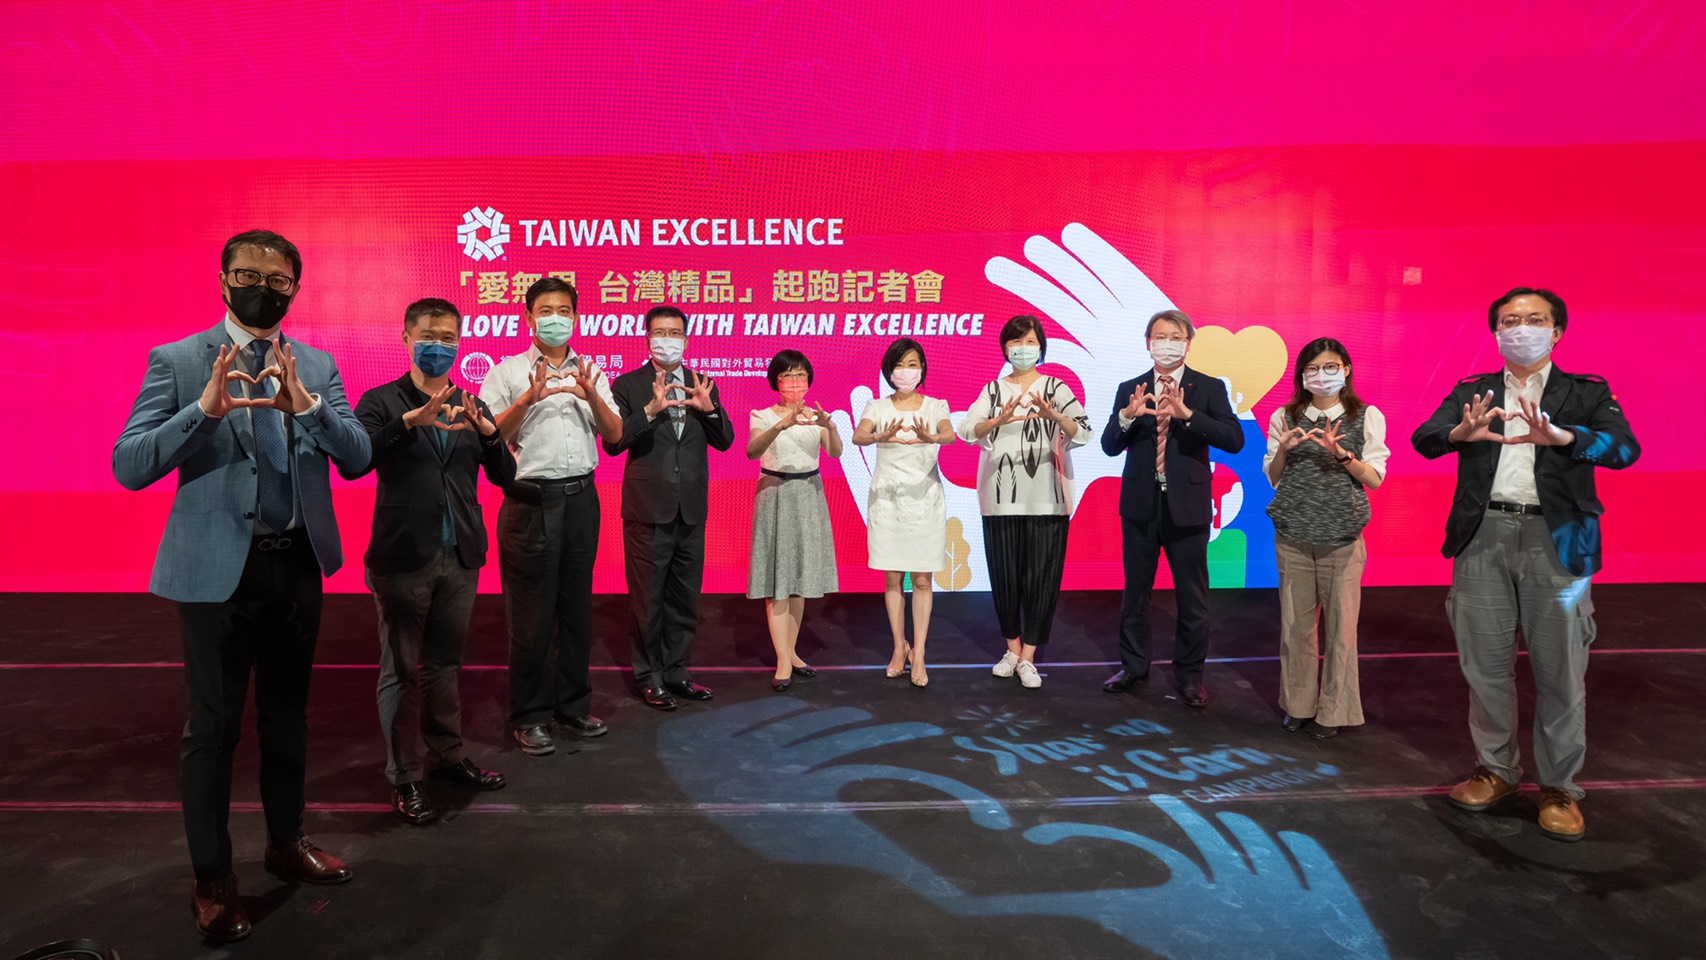 SharingIsCaring TAIWAN EXCELLENCE พลังเปลี่ยนโลก